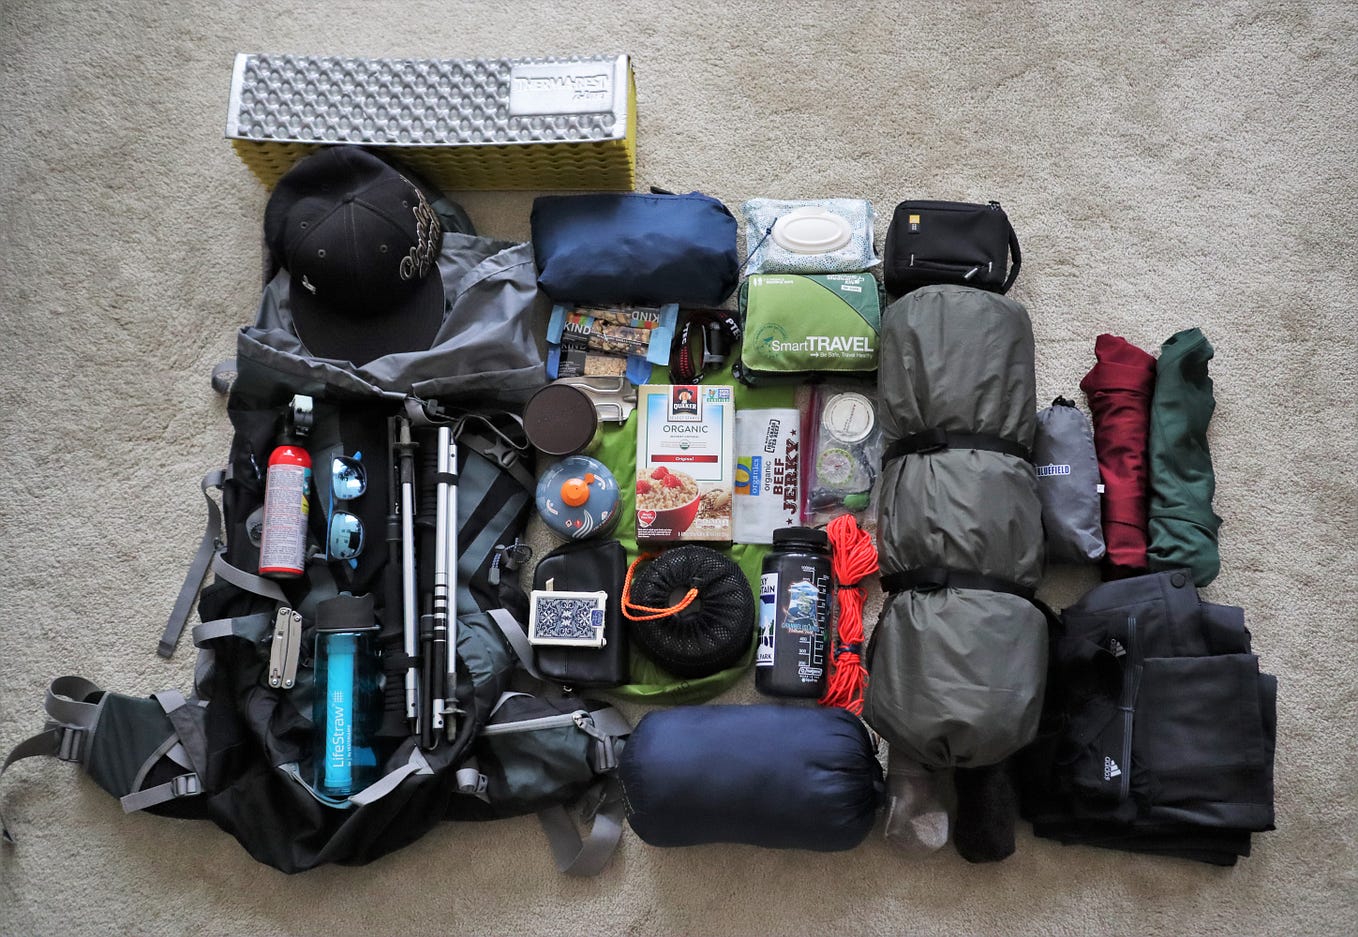 How to pack a backpack: Distribution, organization & waterproofing